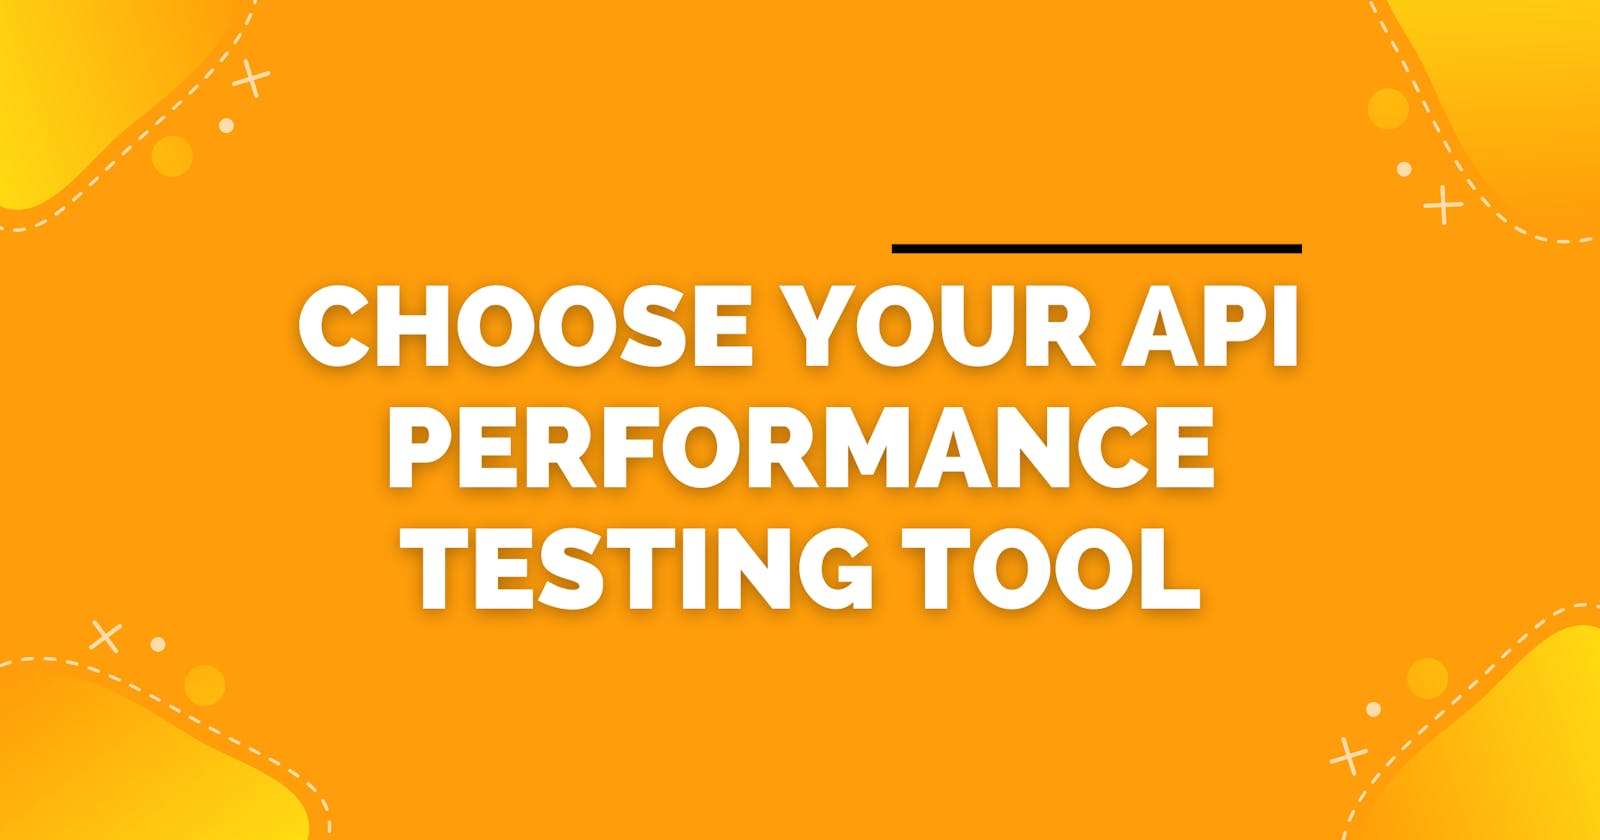 How to choose your API Performance testing tool - A guide for different use cases